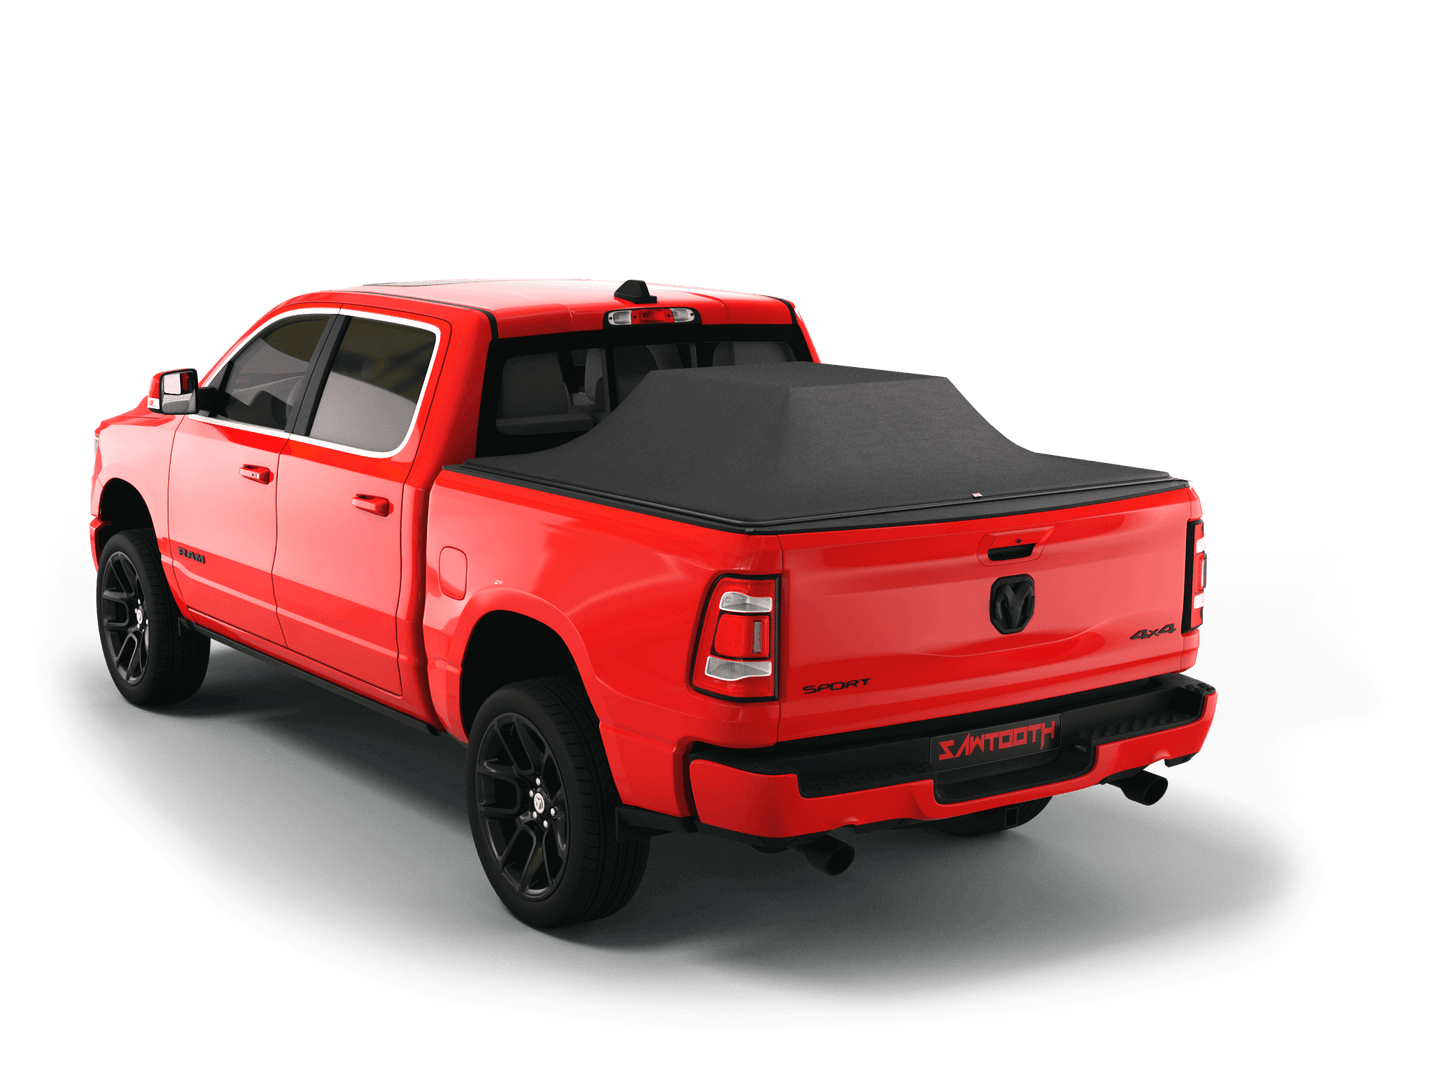 Red Ram 1500 with gear in the truck bed and the Sawtooth Stretch tonneau cover expanded over cargo load